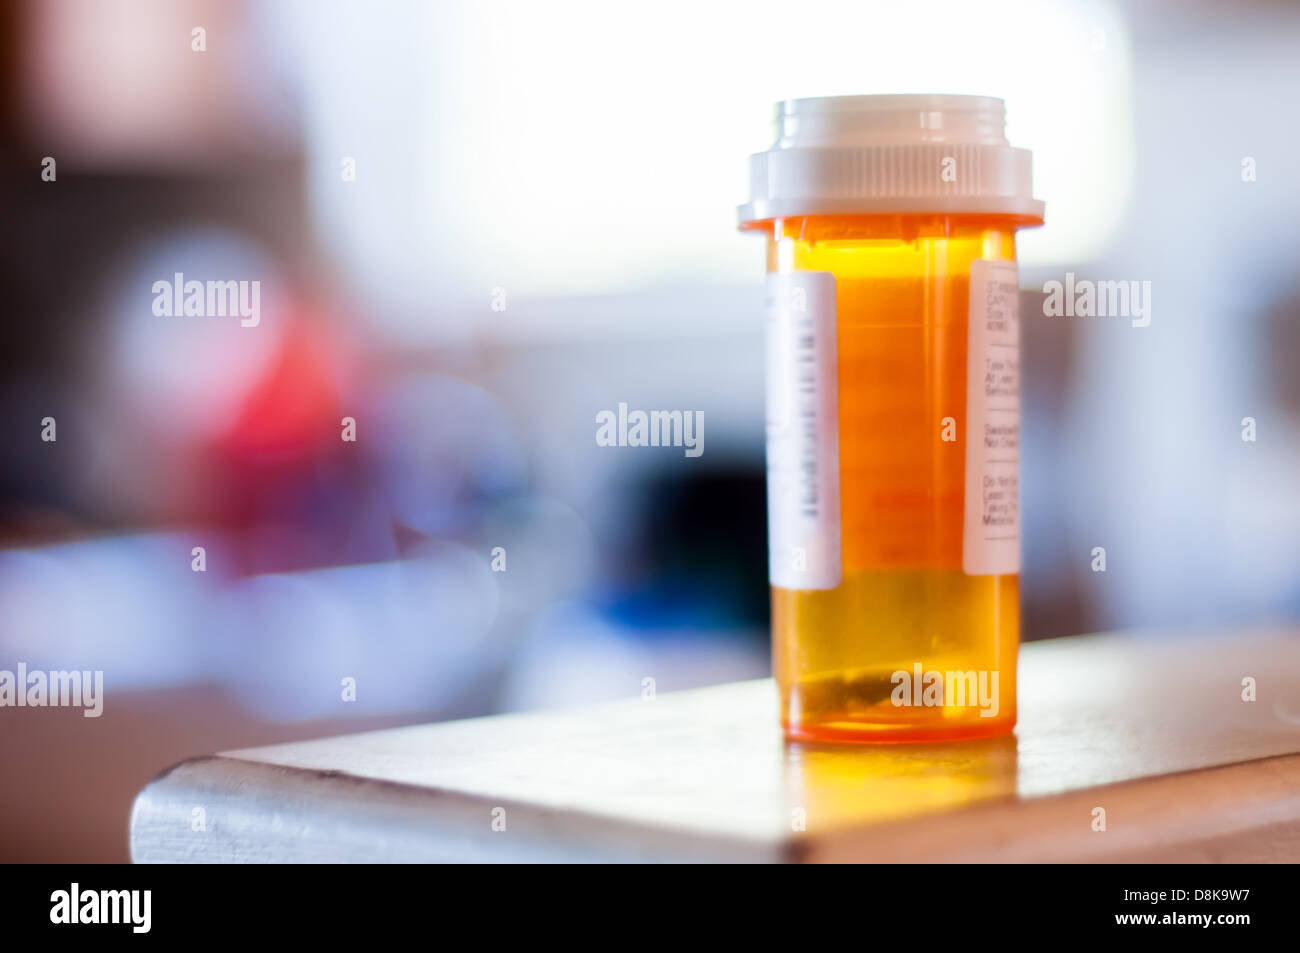 Running out of medicine as seen in a nearly empty pill bottle. Stock Photo